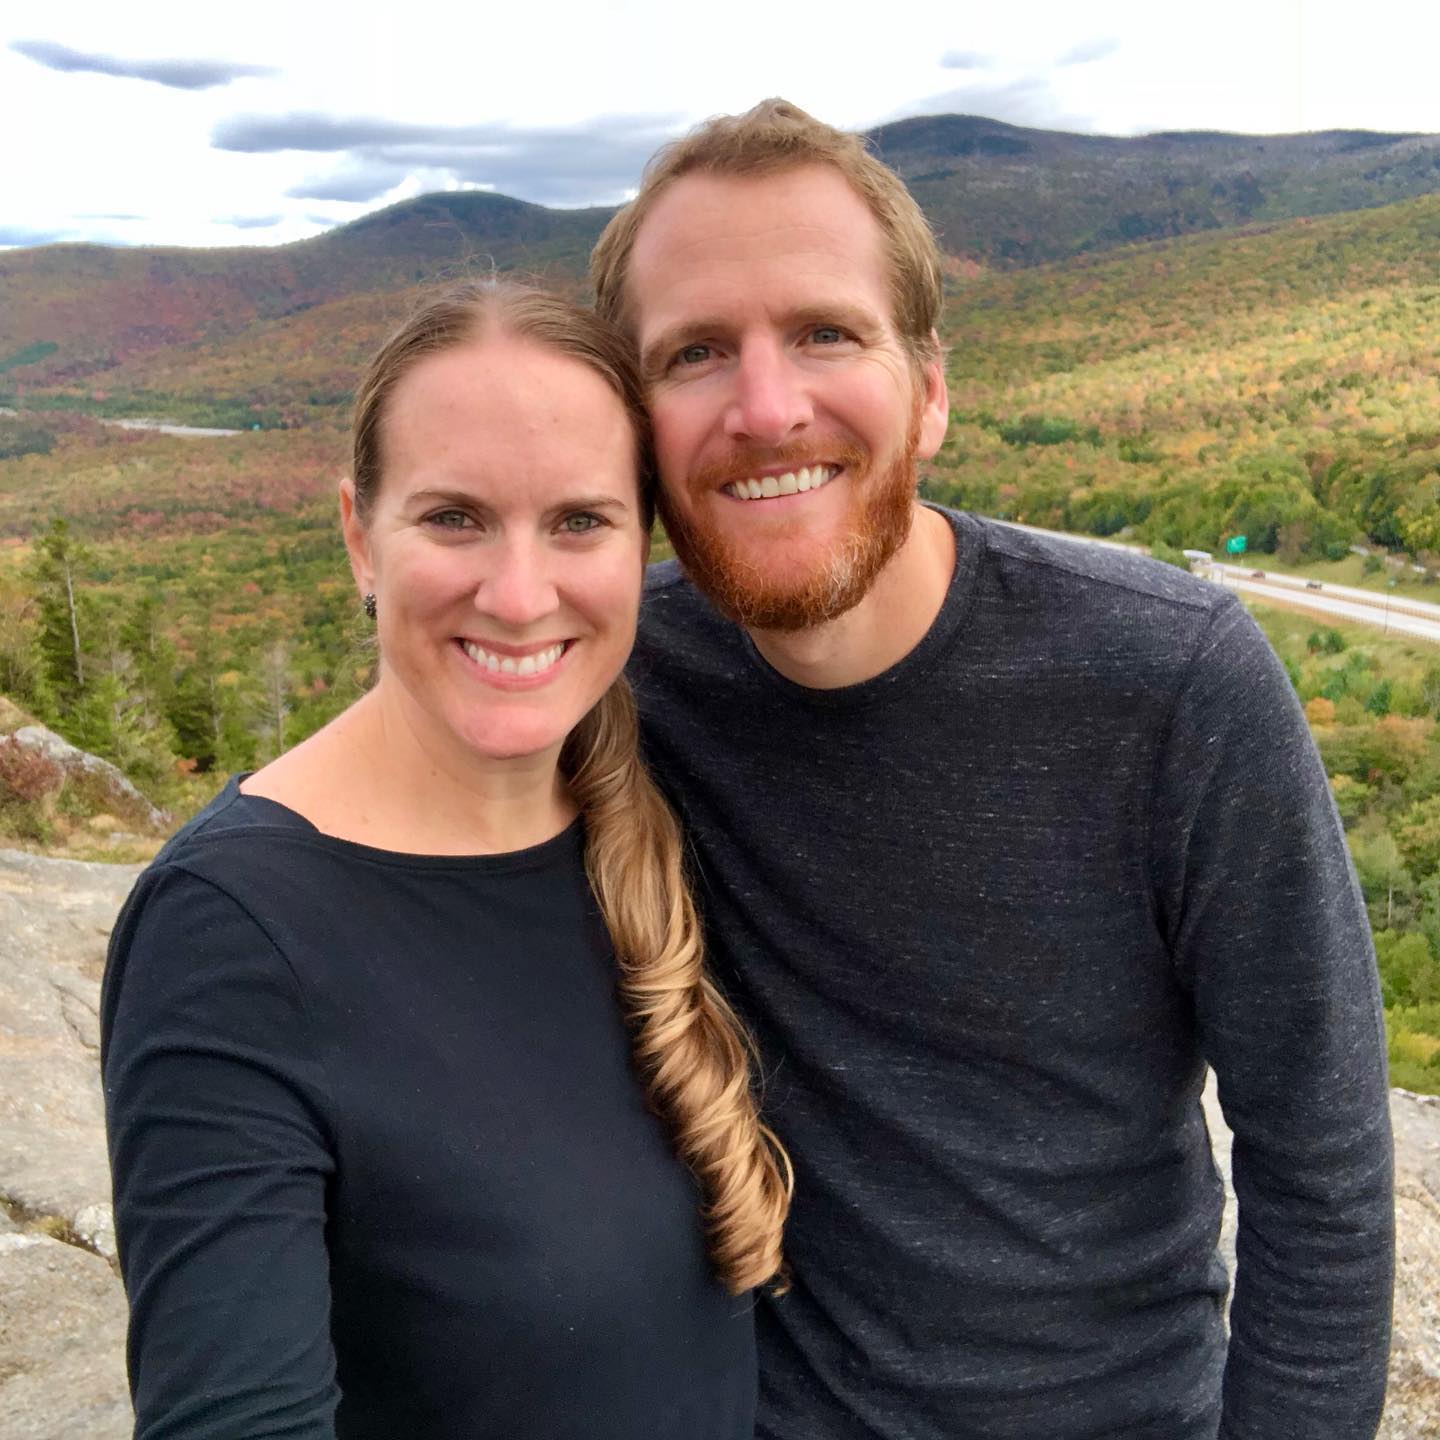 We were all smiles during our 2018 fall foliage trip through New England. Growing up in Florida, we didn’t experience much of a fall season, so this was a trip we had dreamed of for many years.

#fall #fallcolors #fallfoliage #whitemountains #newhampshire #fallvibes #nhigers #newengland #lovenature #newenglandfall #scenicdrive #fallroadtrip #worldsmileday